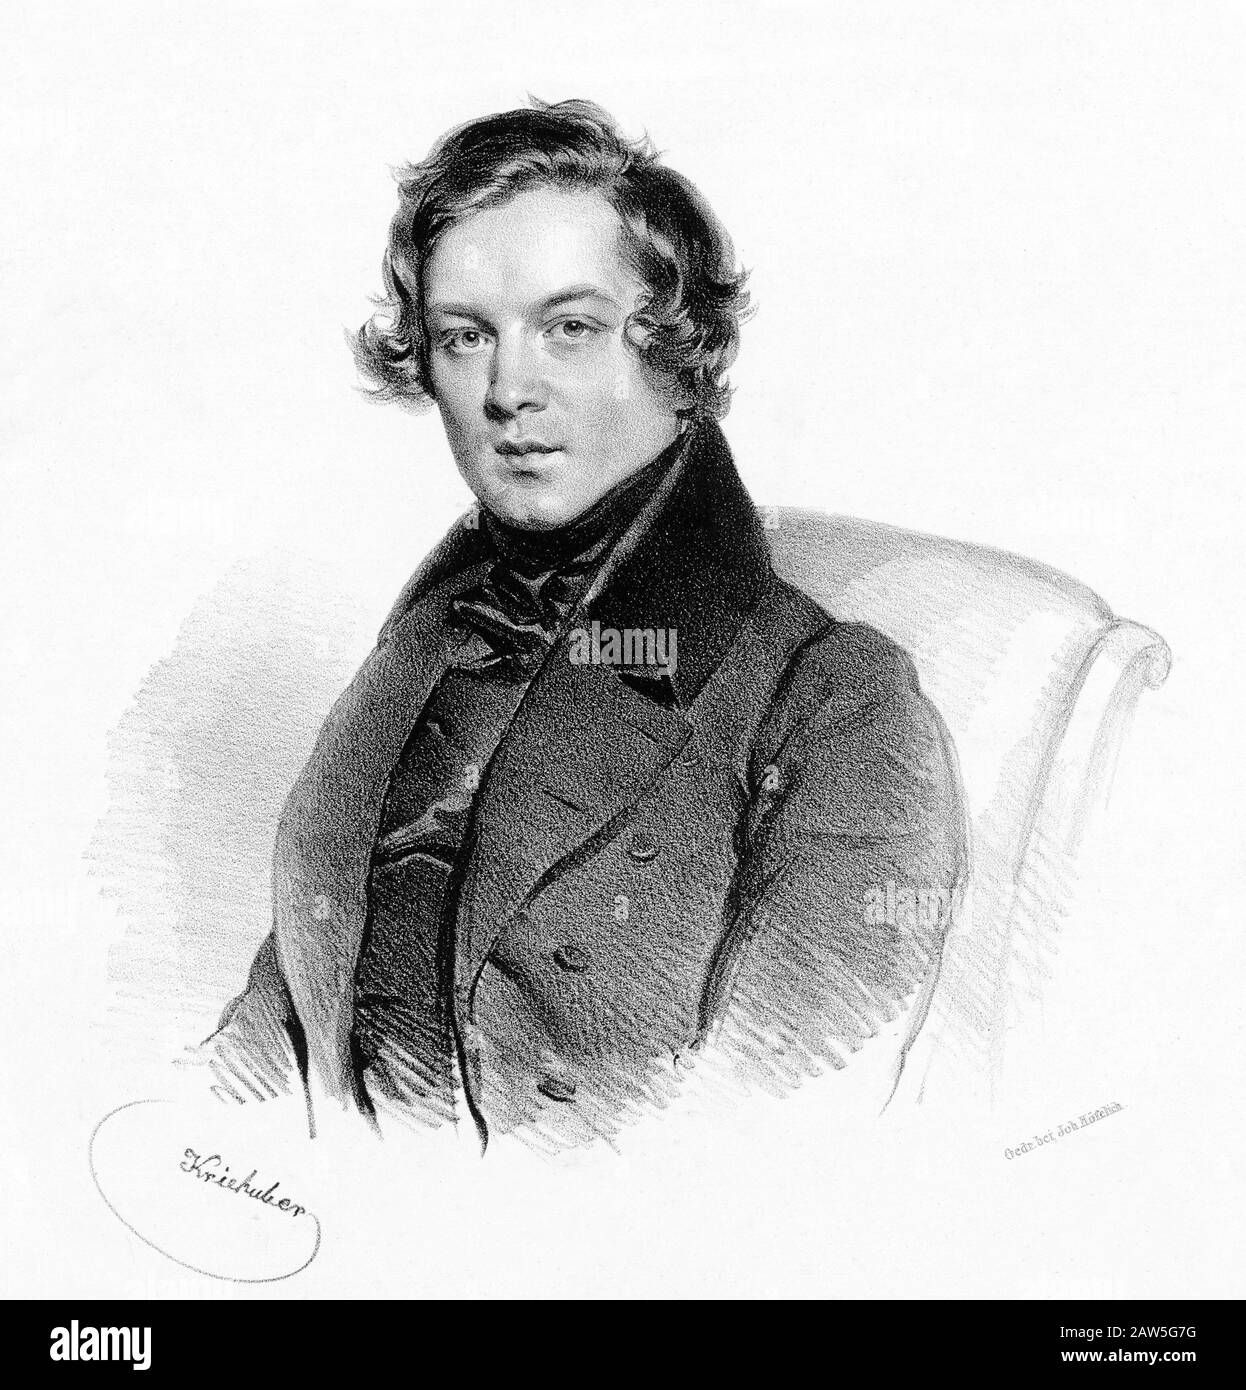 1839 , GERMANY :  The celebrated german music composer and pianist ROBERT SCHUMANN ( 1810 - 1856 ) , friend of Johannes Brahms  . Portrait engraved by Stock Photo